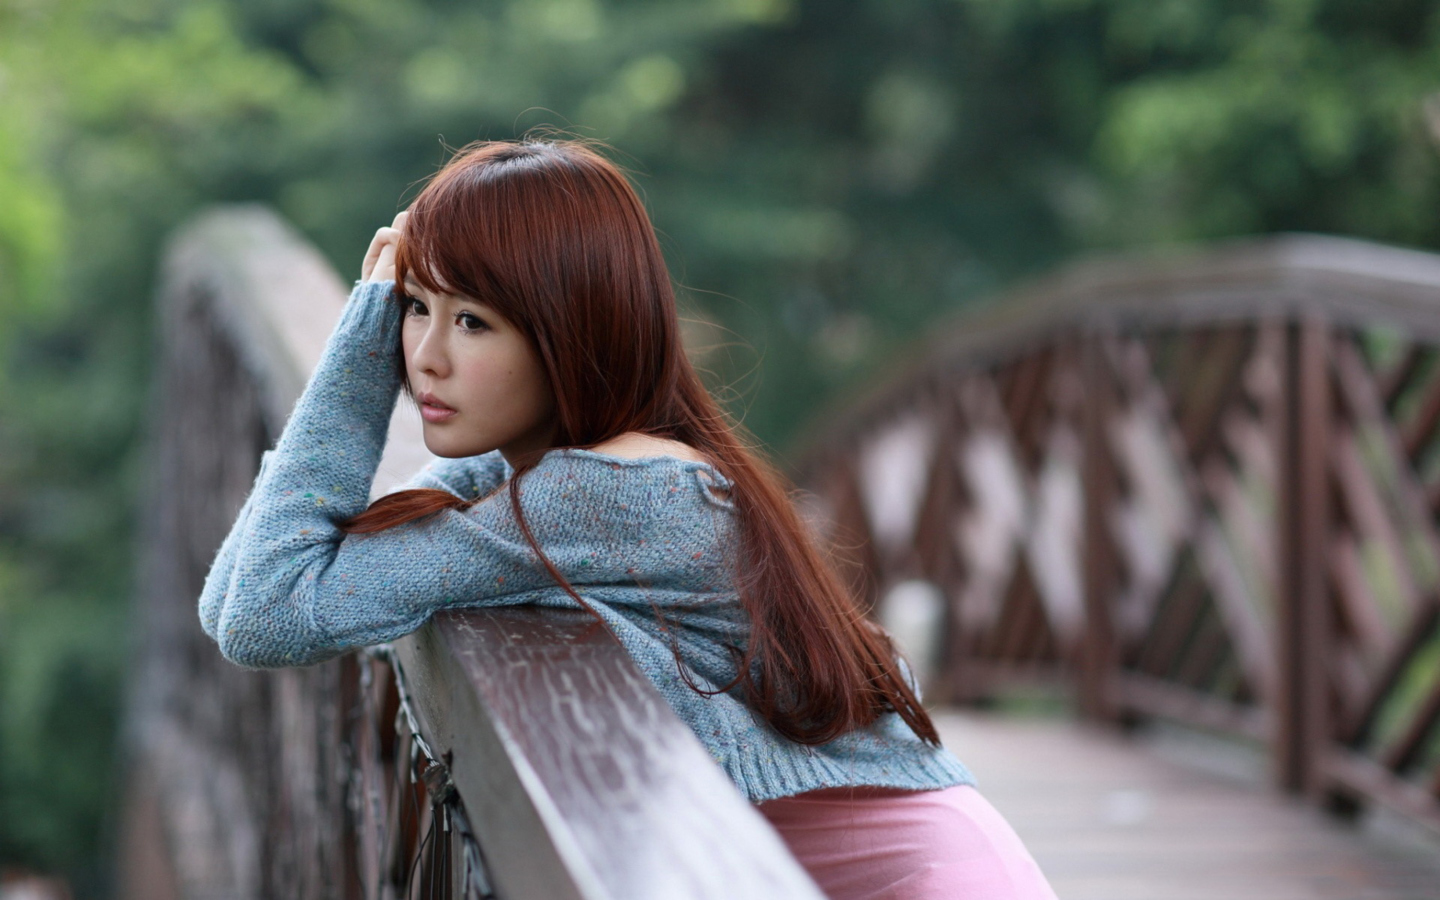 Cute Asian Girl Looking Lonely wallpaper 1440x900